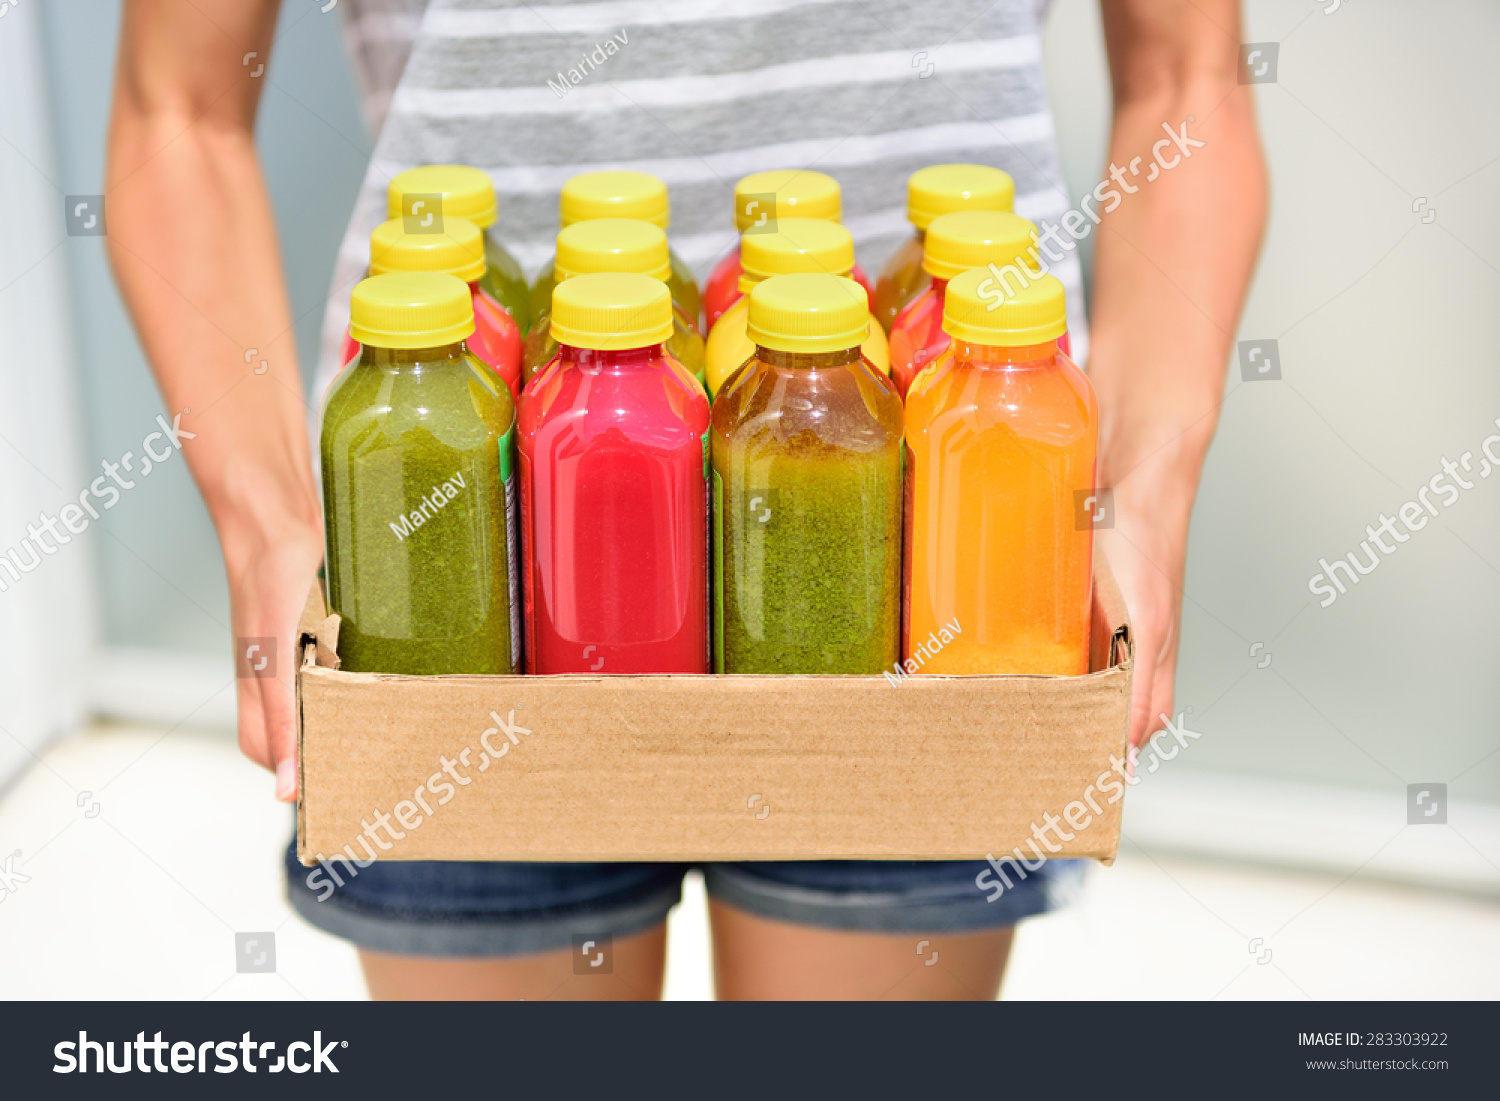 Juicing cold pressed vegetable juices for a detox diet. Dieting by cleansing your body from toxins with raw organic fruits and vegetables juice made fresh and delivered in bottles. #283303922